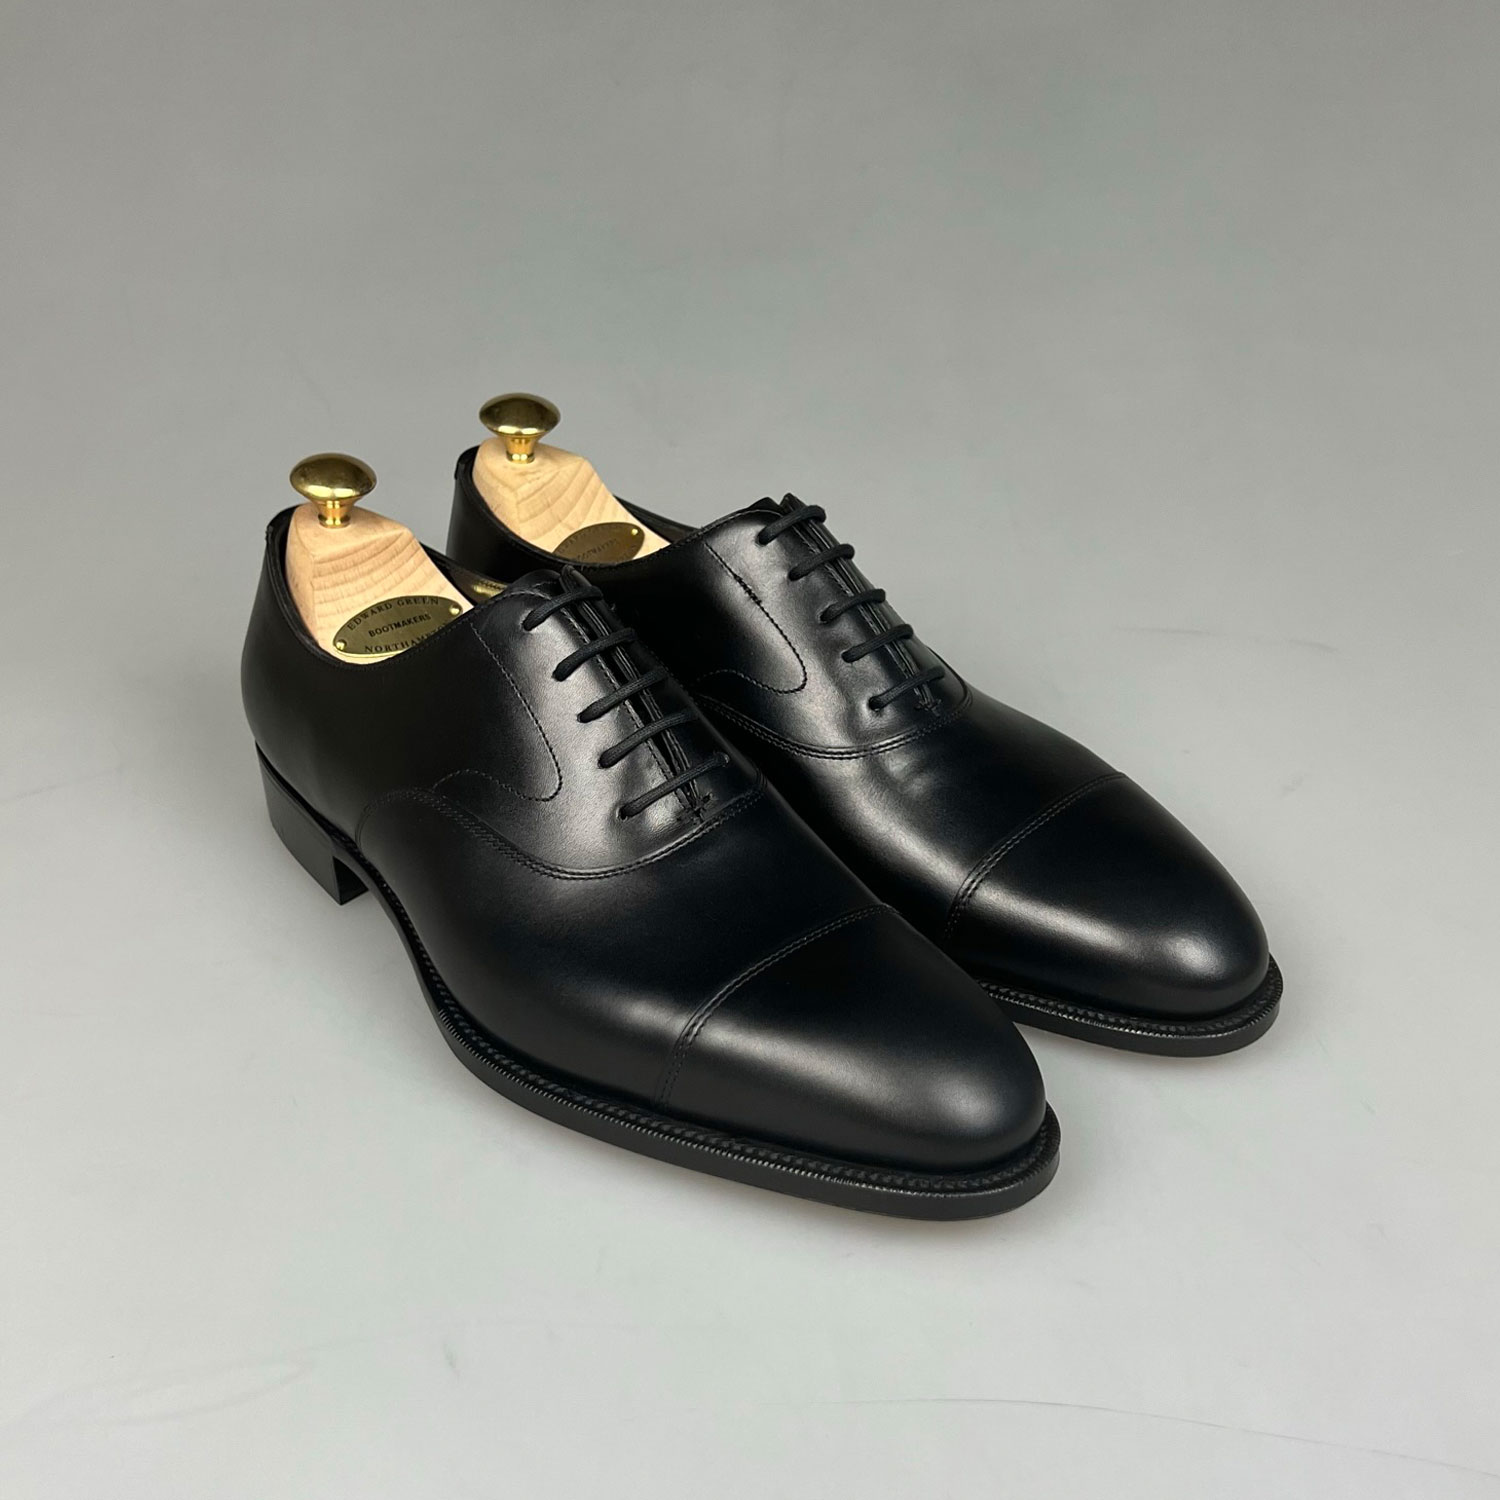 Shop Edward Green Chelsea online at Shoes & Shirts